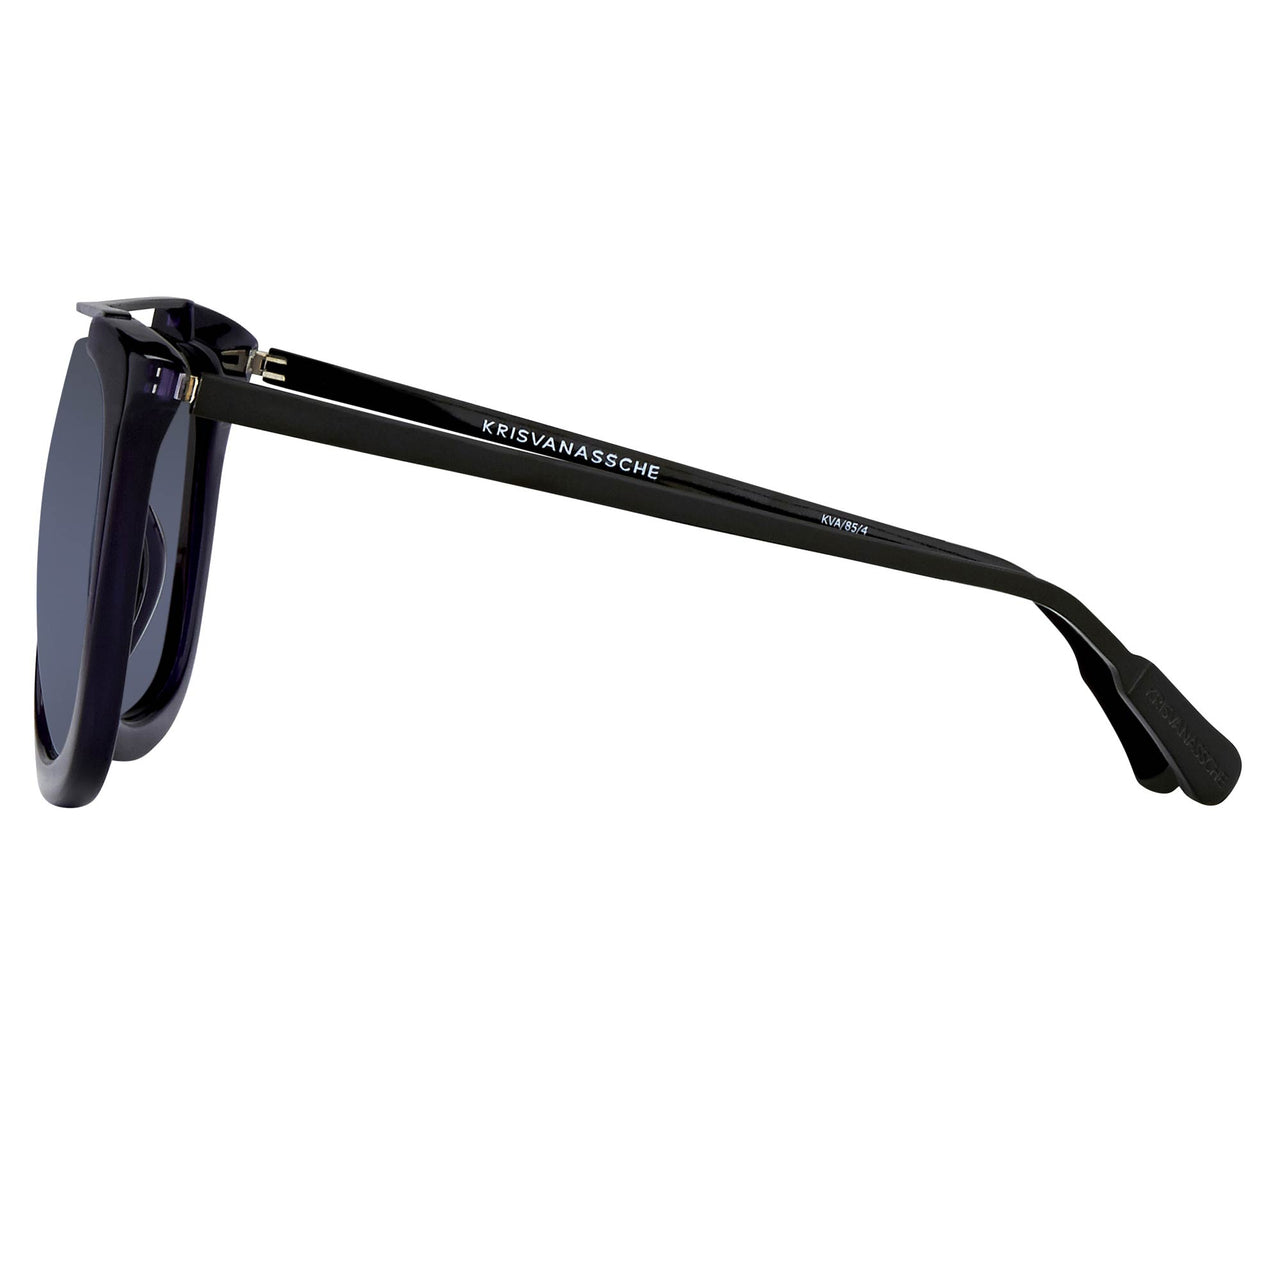 Kris Van Assche Sunglasses with Titanium D-Frame Navy Shiny Black and Blue Mirror Lenses Category 3 - KVA85C4SUN - Watches & Crystals